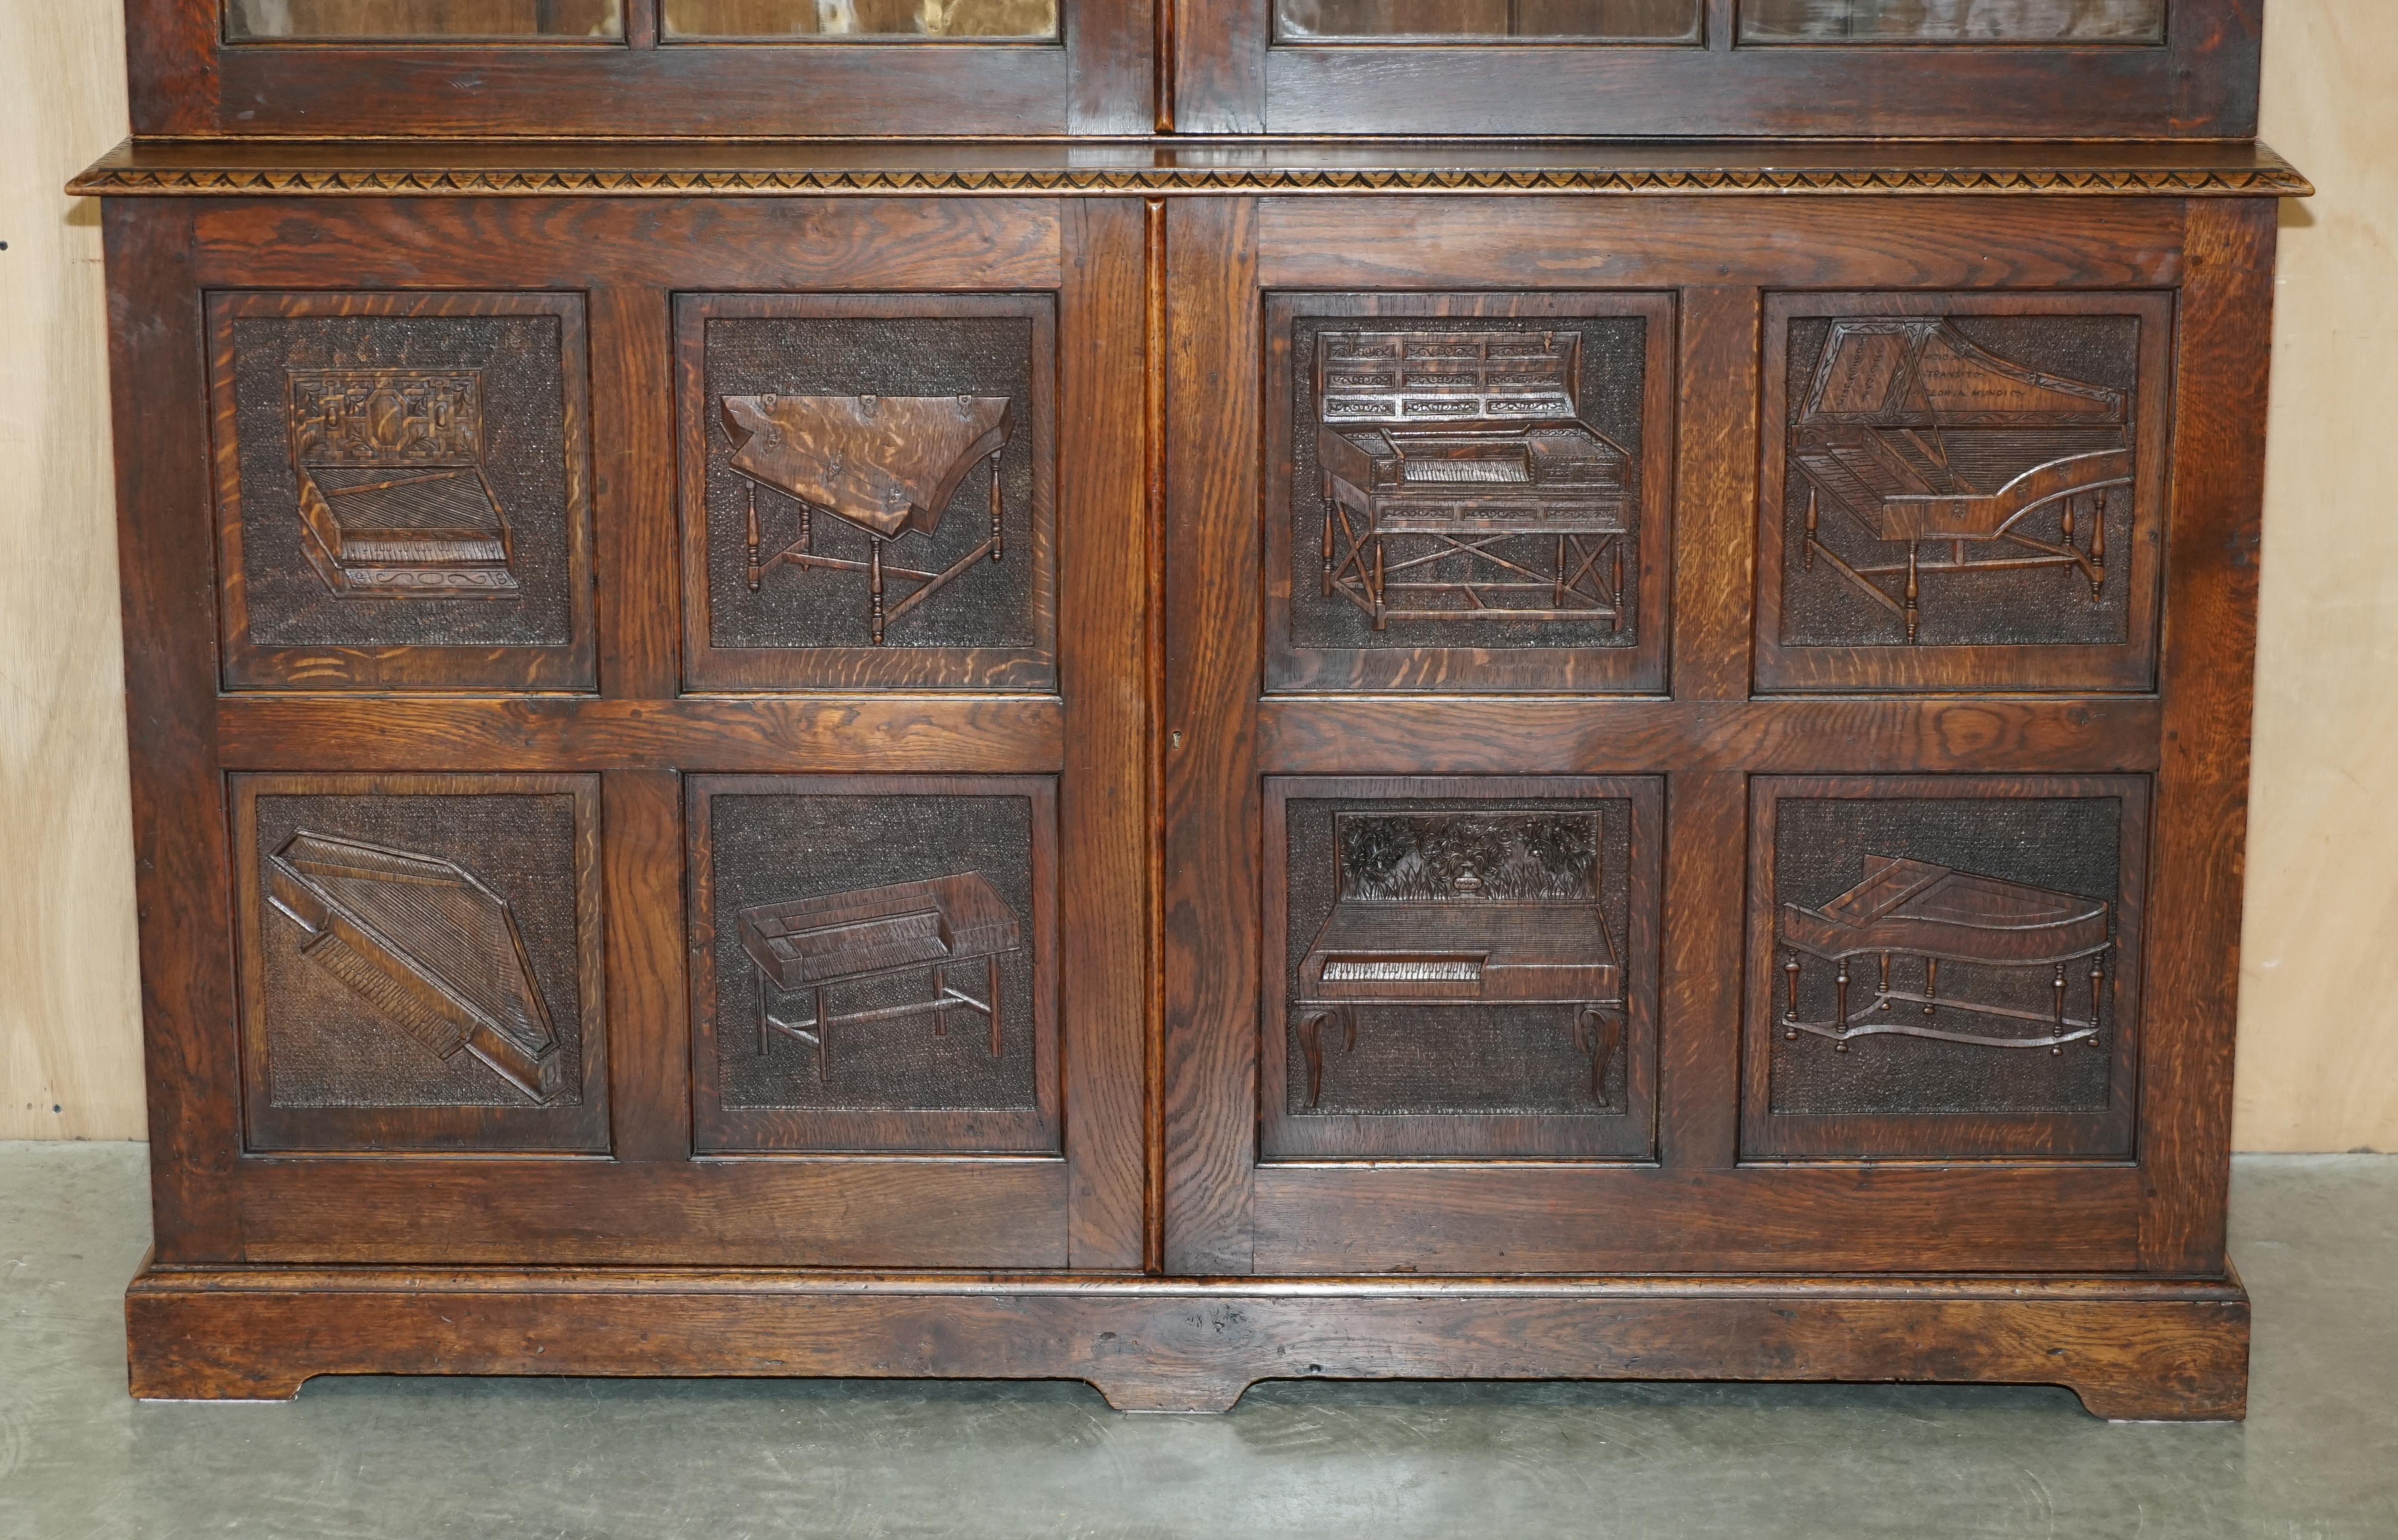 IMPORTANT CARVED BOOKCASE CABiNET FROM THE BATE COLLECTION IN OXFORD UNIVERSITY For Sale 1